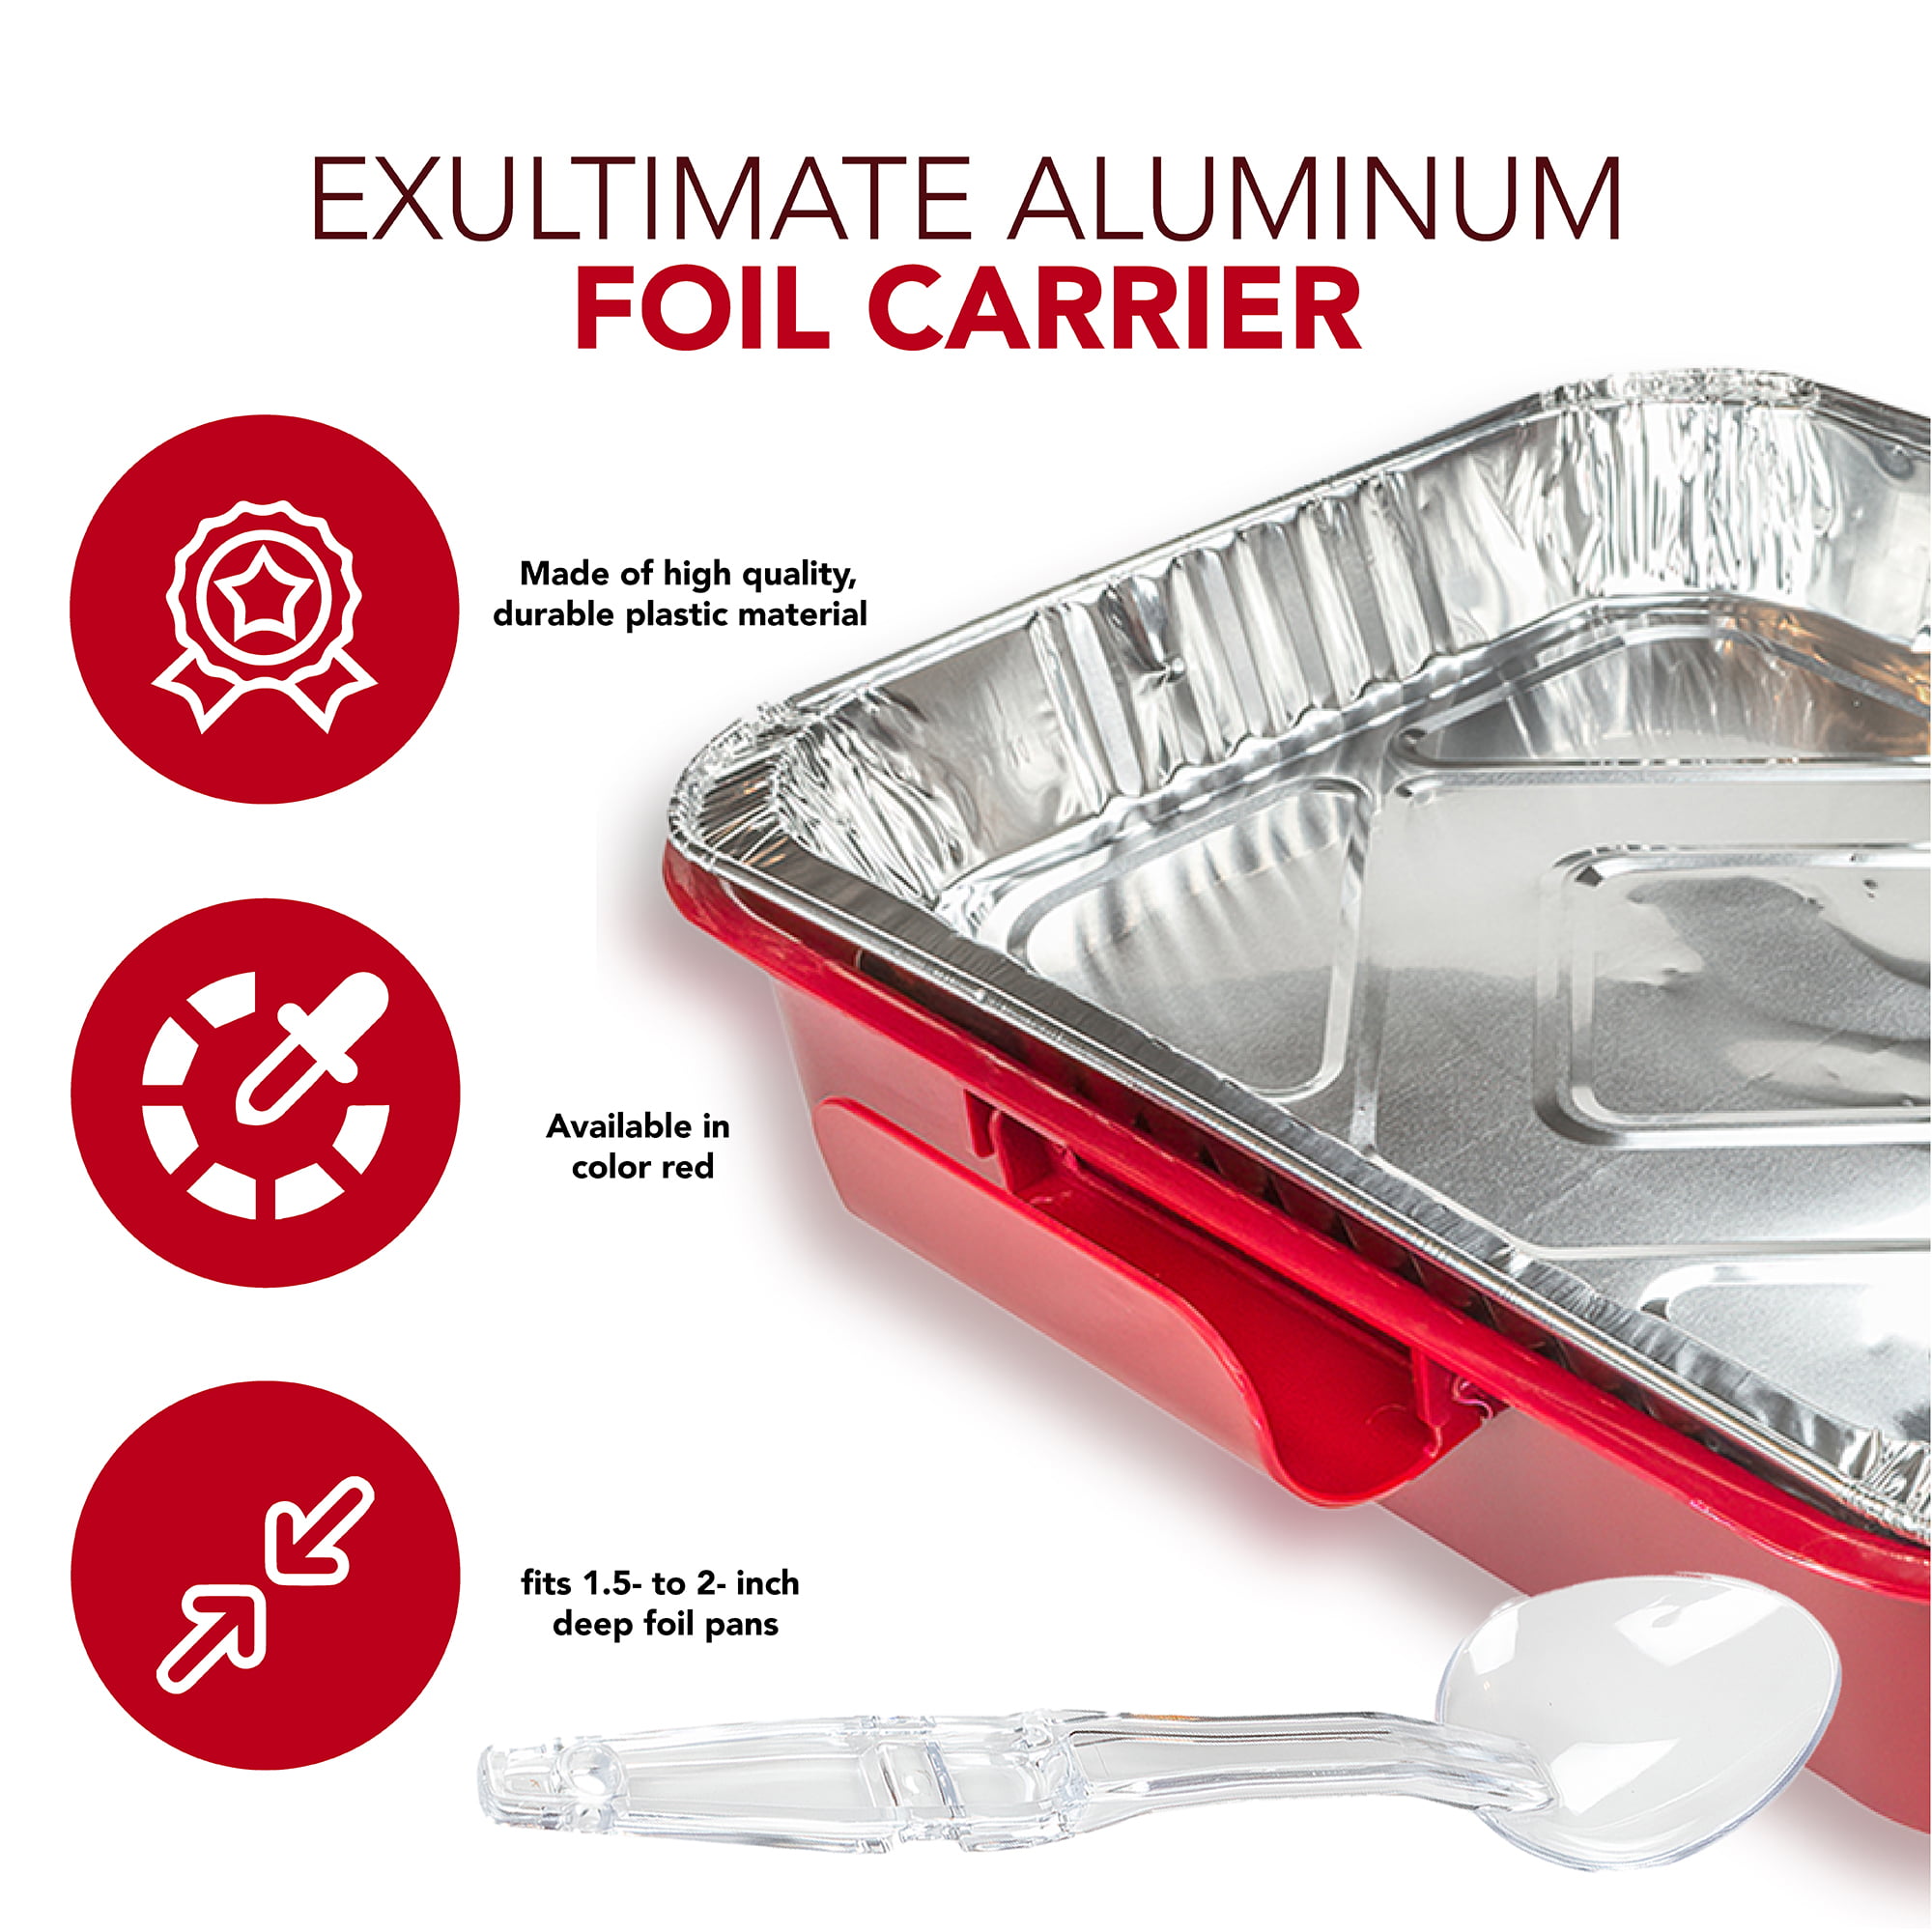 Foil Decor Serving and Casserole Carrier for 9x13 Foil Pans, Heat Resistant  w/Handles, Lid Locks in Place for Safe and Easy Carrying, Lid Doubles as a